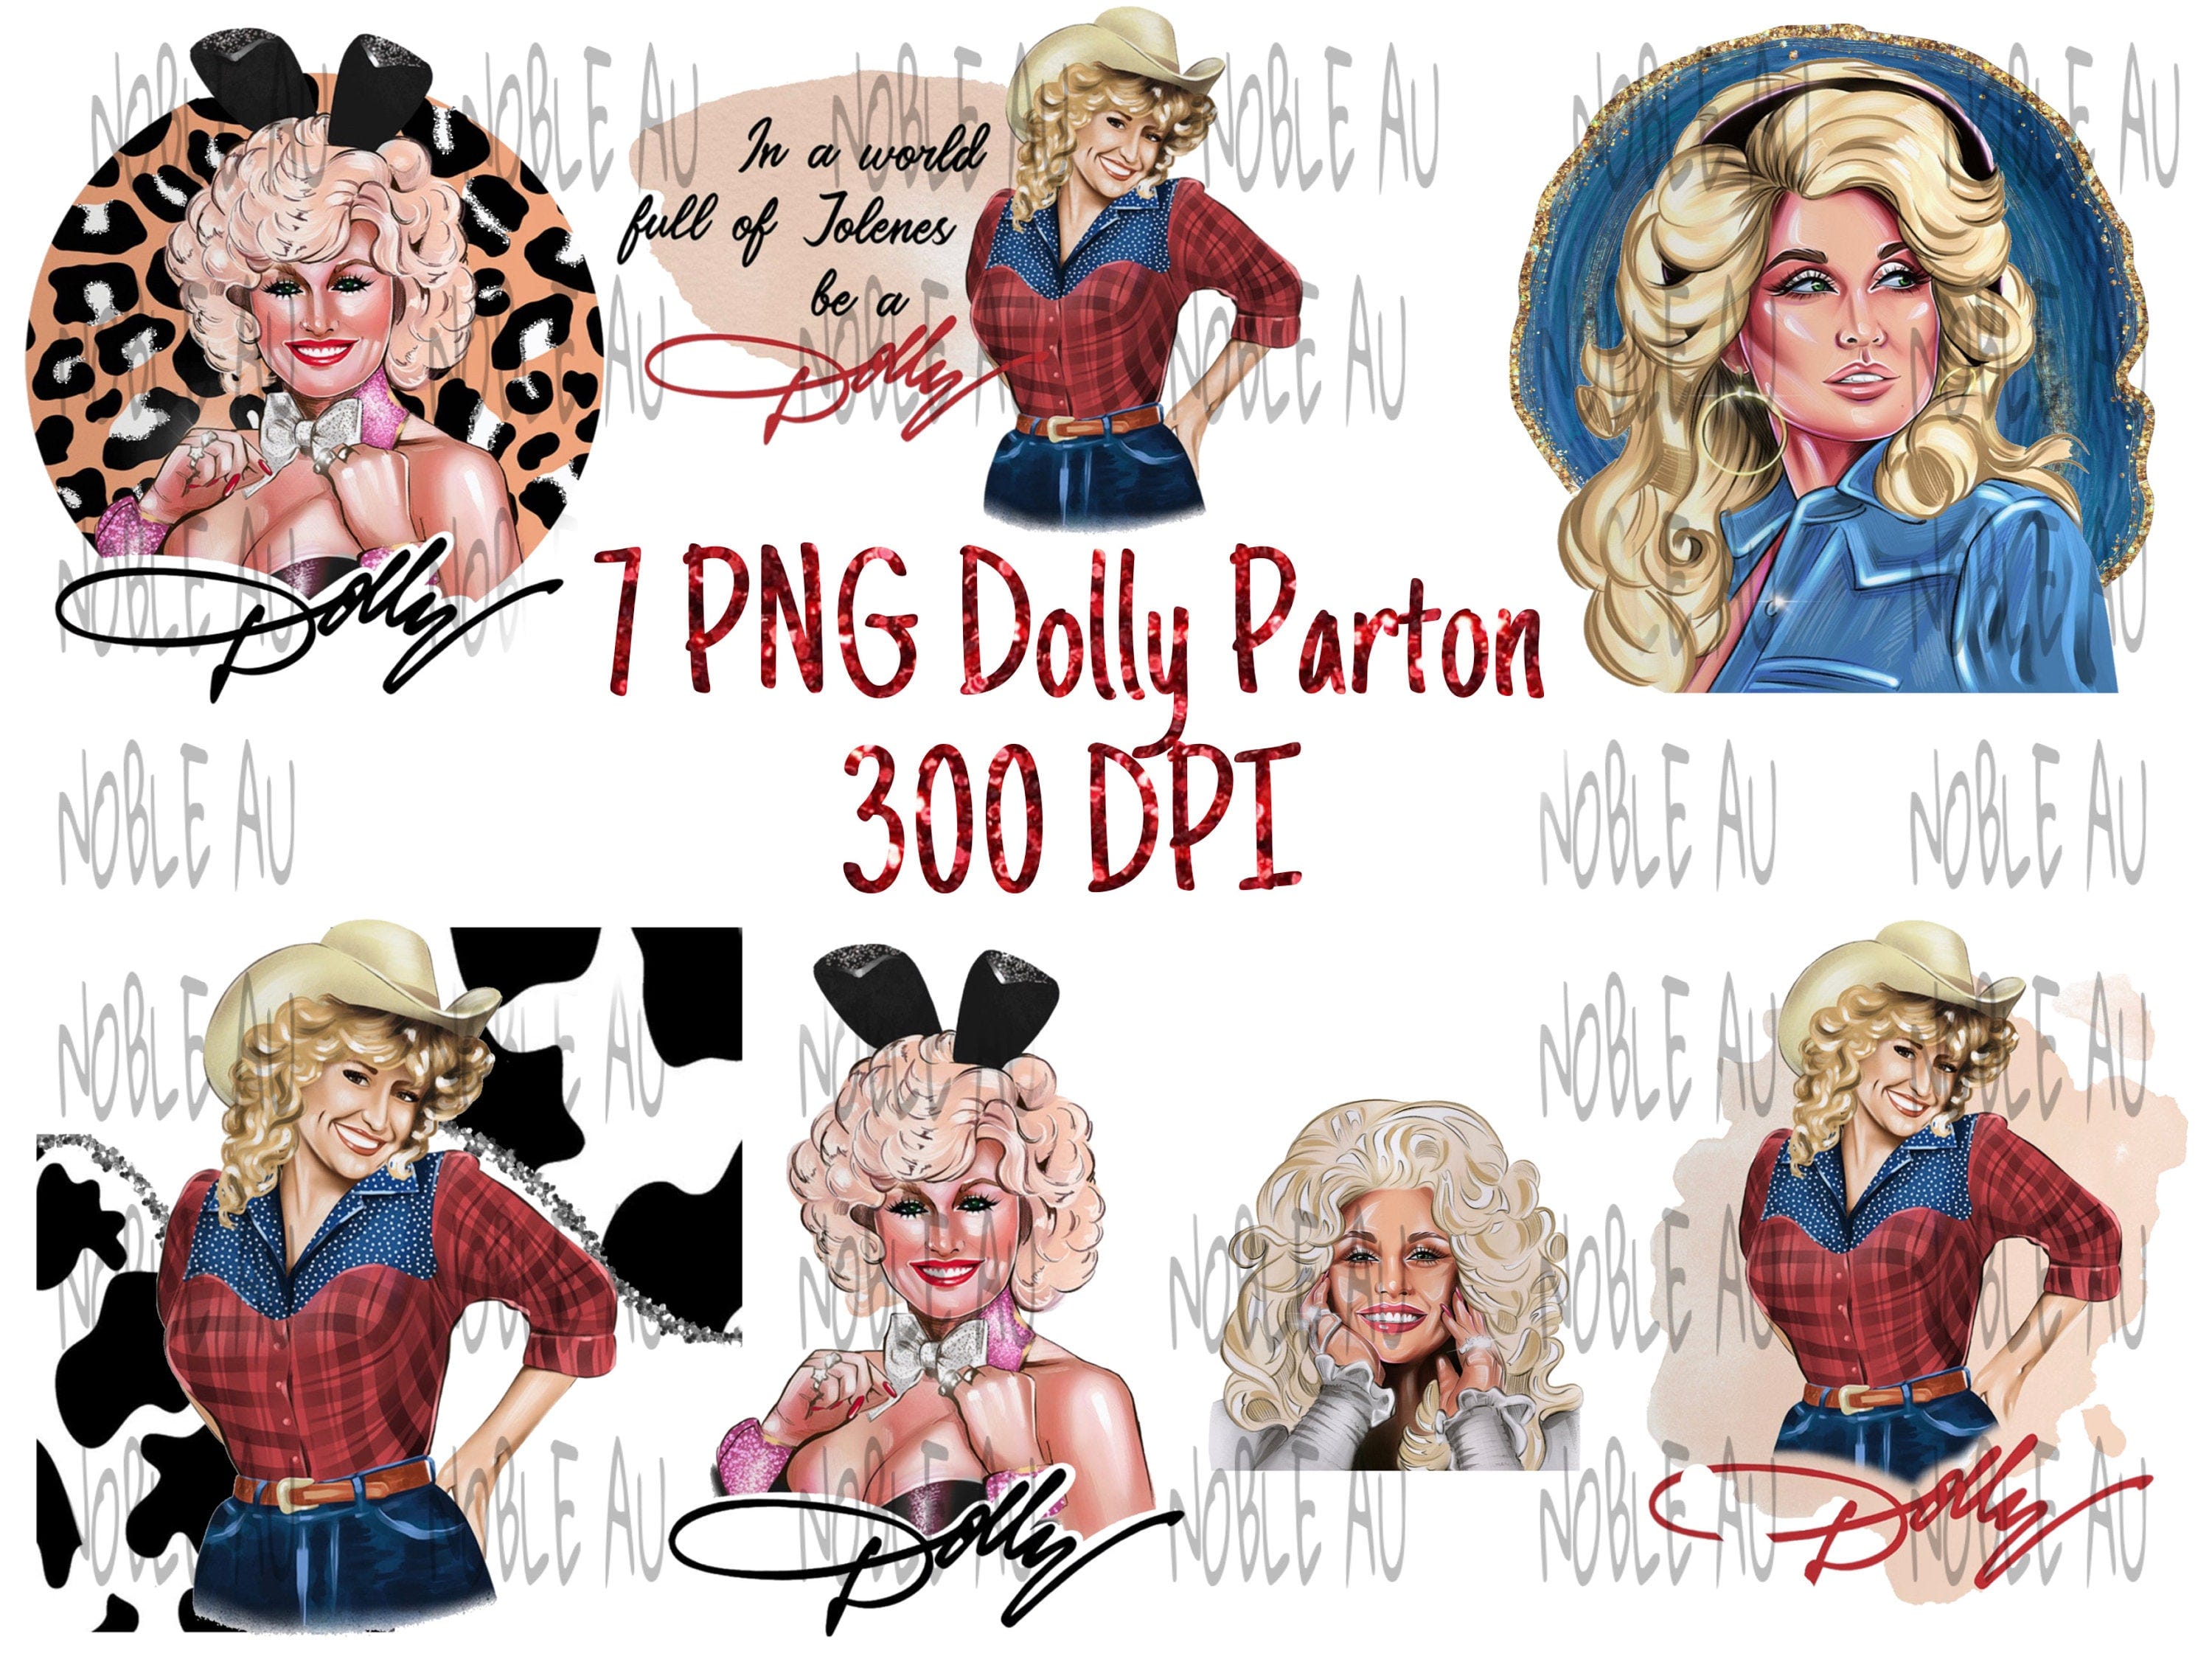 7 Dolly Parton PNG, Leopard, Dolly, In A world Full Of A Jolenes Be A Dolly, Cow Print Background, Sublimation Design, 300 DPI, PNG